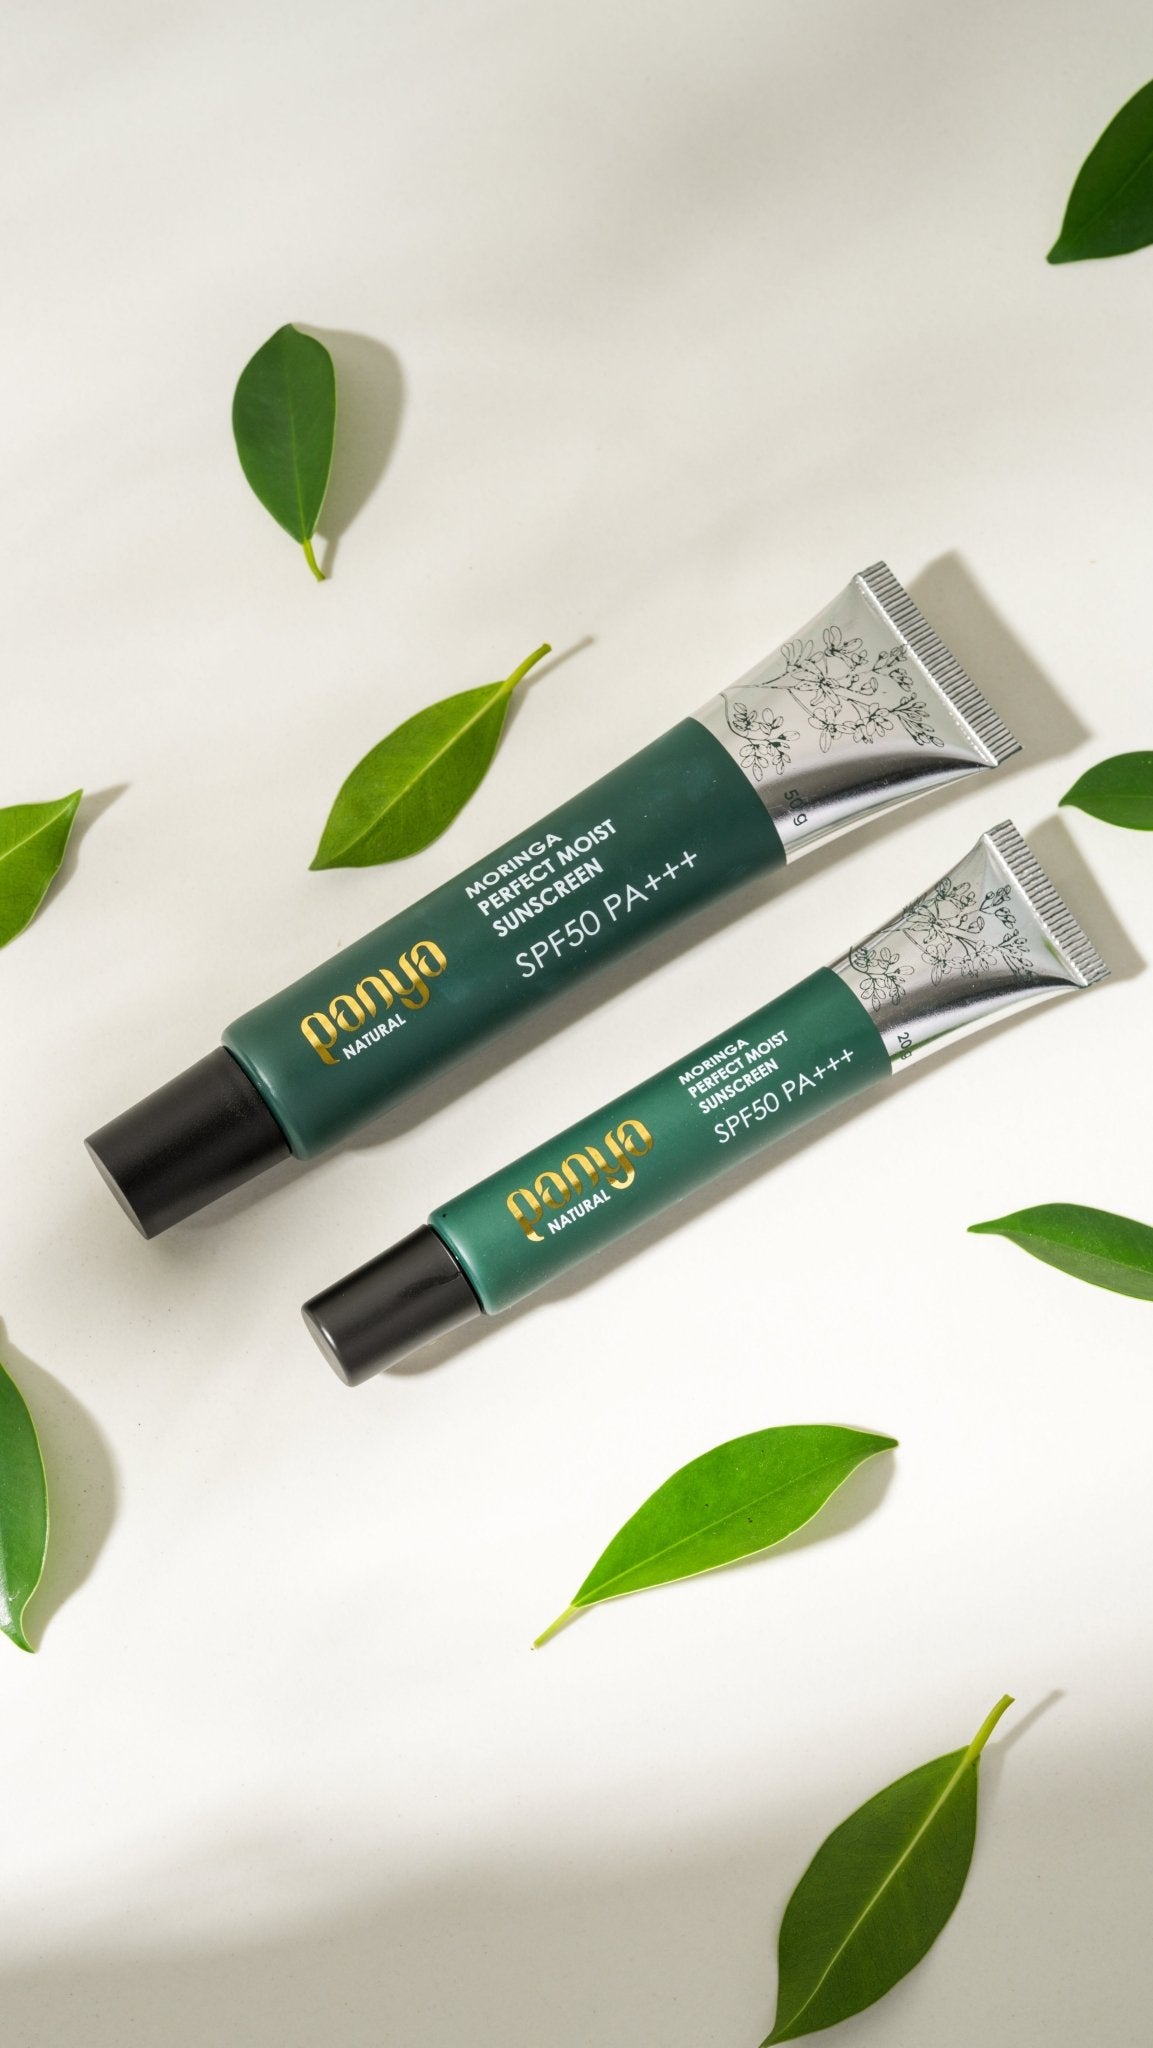 Panya - Moist Sunscreen SPF50: hydrating &amp; oil-balancing for the skin, with Thai moringa &amp; other essential oils for a potent, natural sun &amp; pollution protection. 